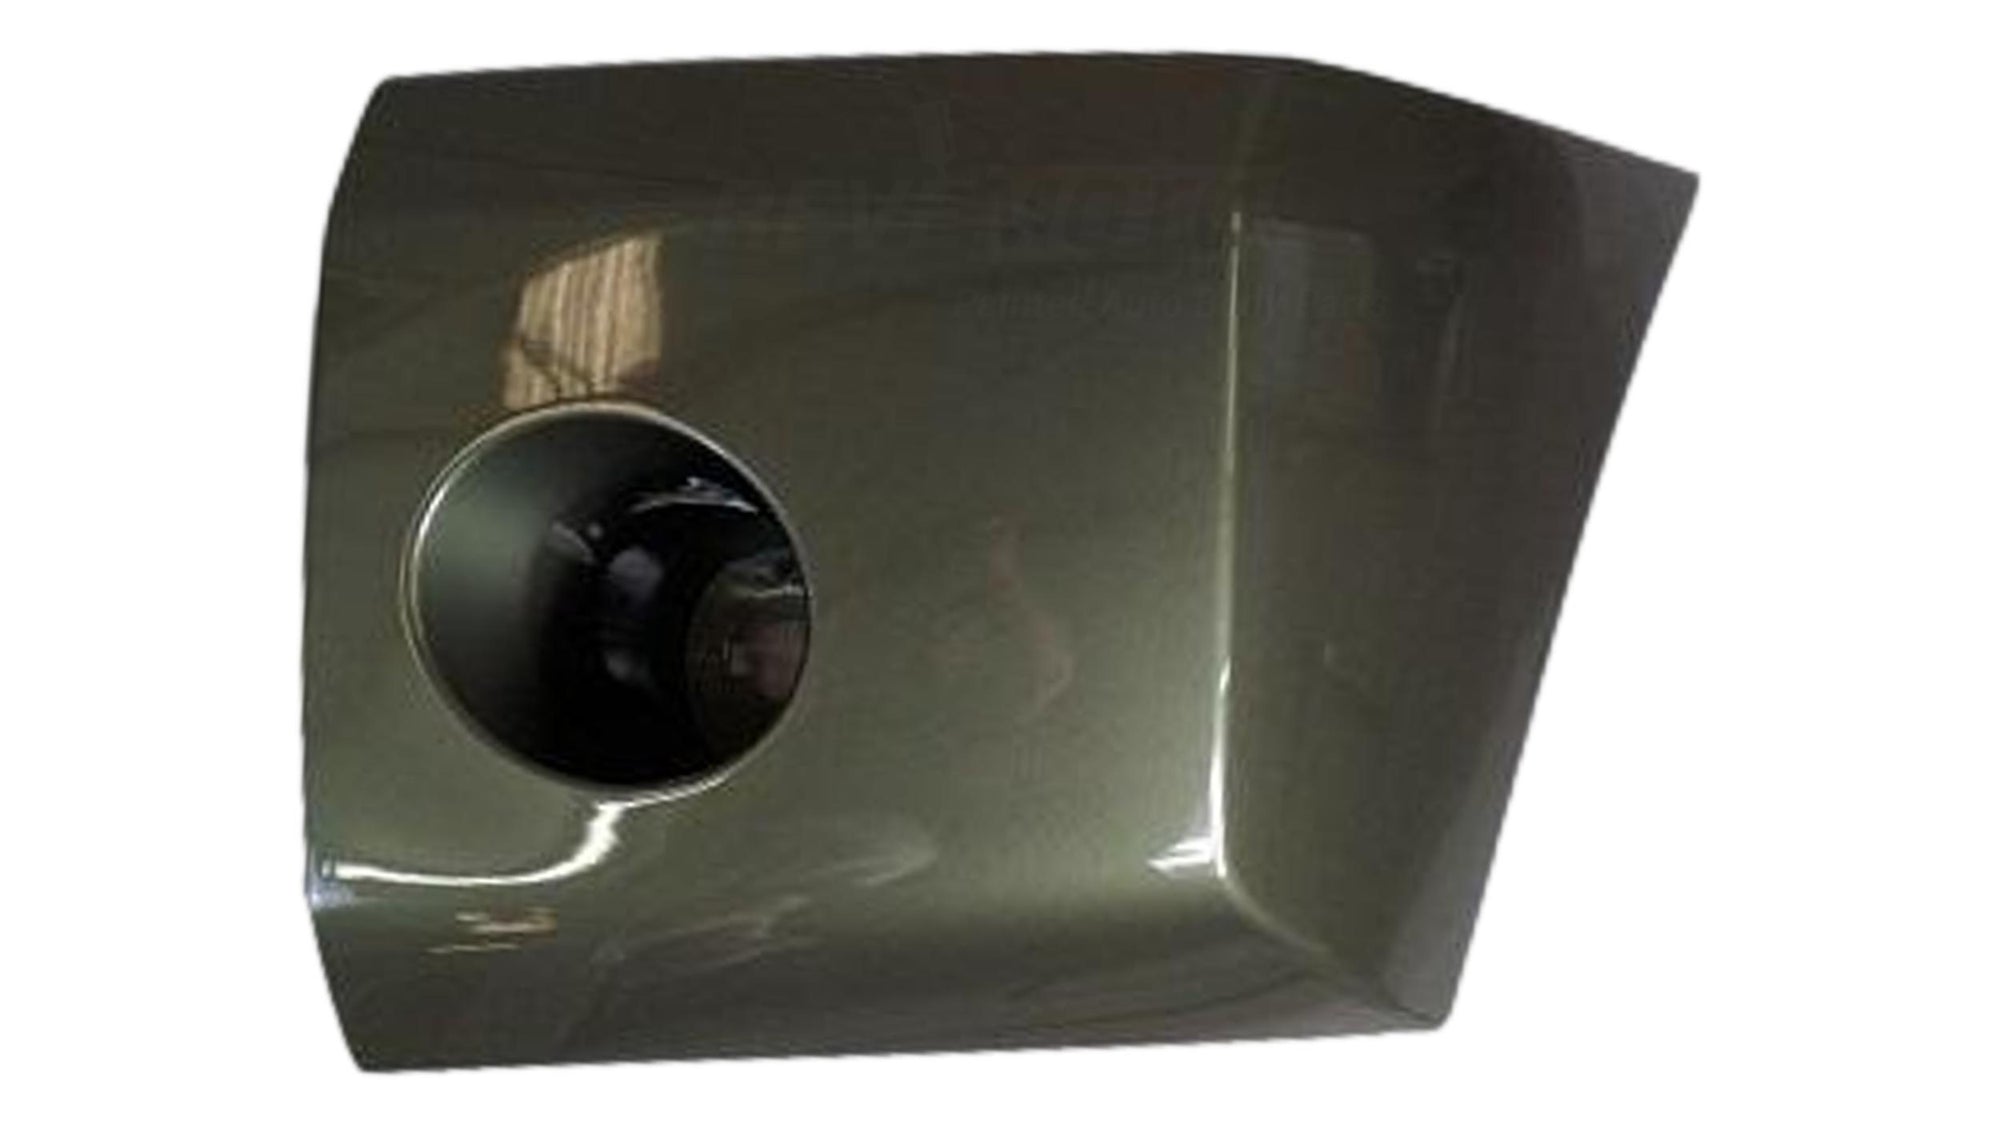 2004-2007 Nissan Armada Front End Cap Painted Canteen Metallic Green (D13) 620257S220 NI1004147 (Left, Driver-Side)